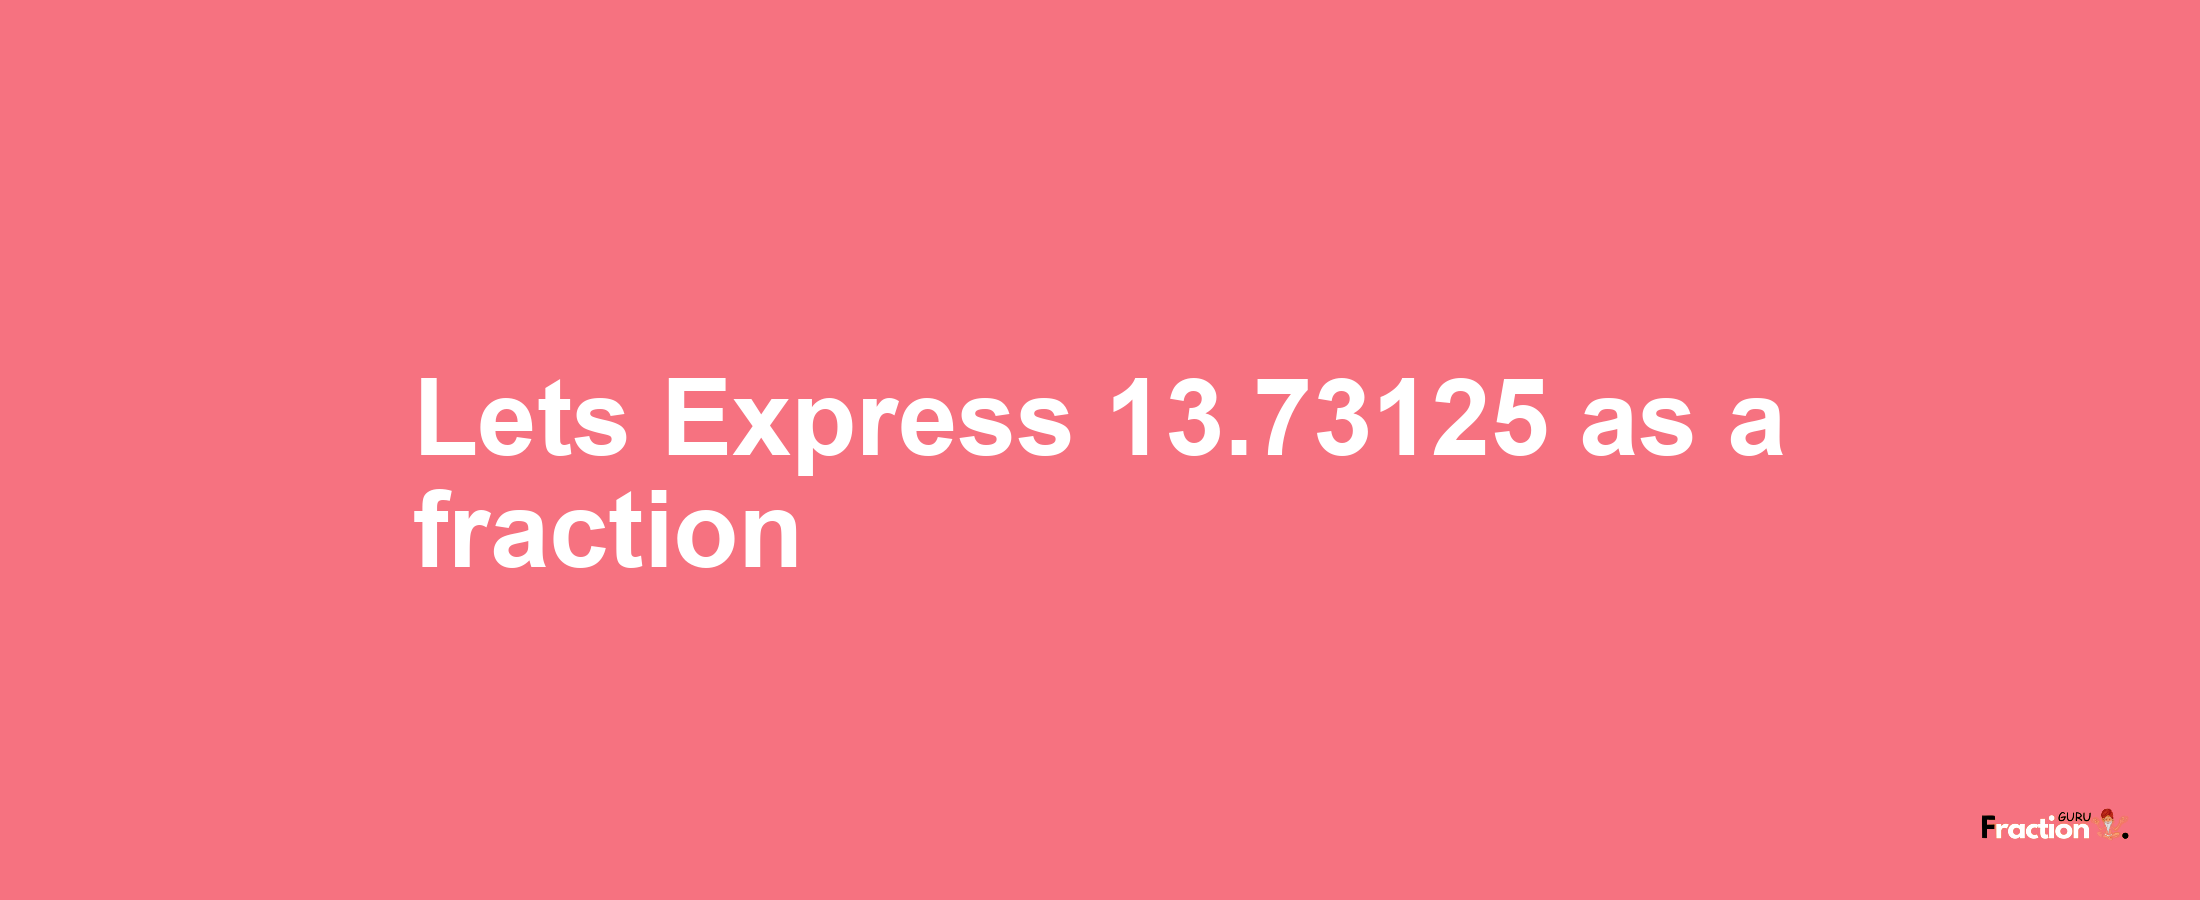 Lets Express 13.73125 as afraction